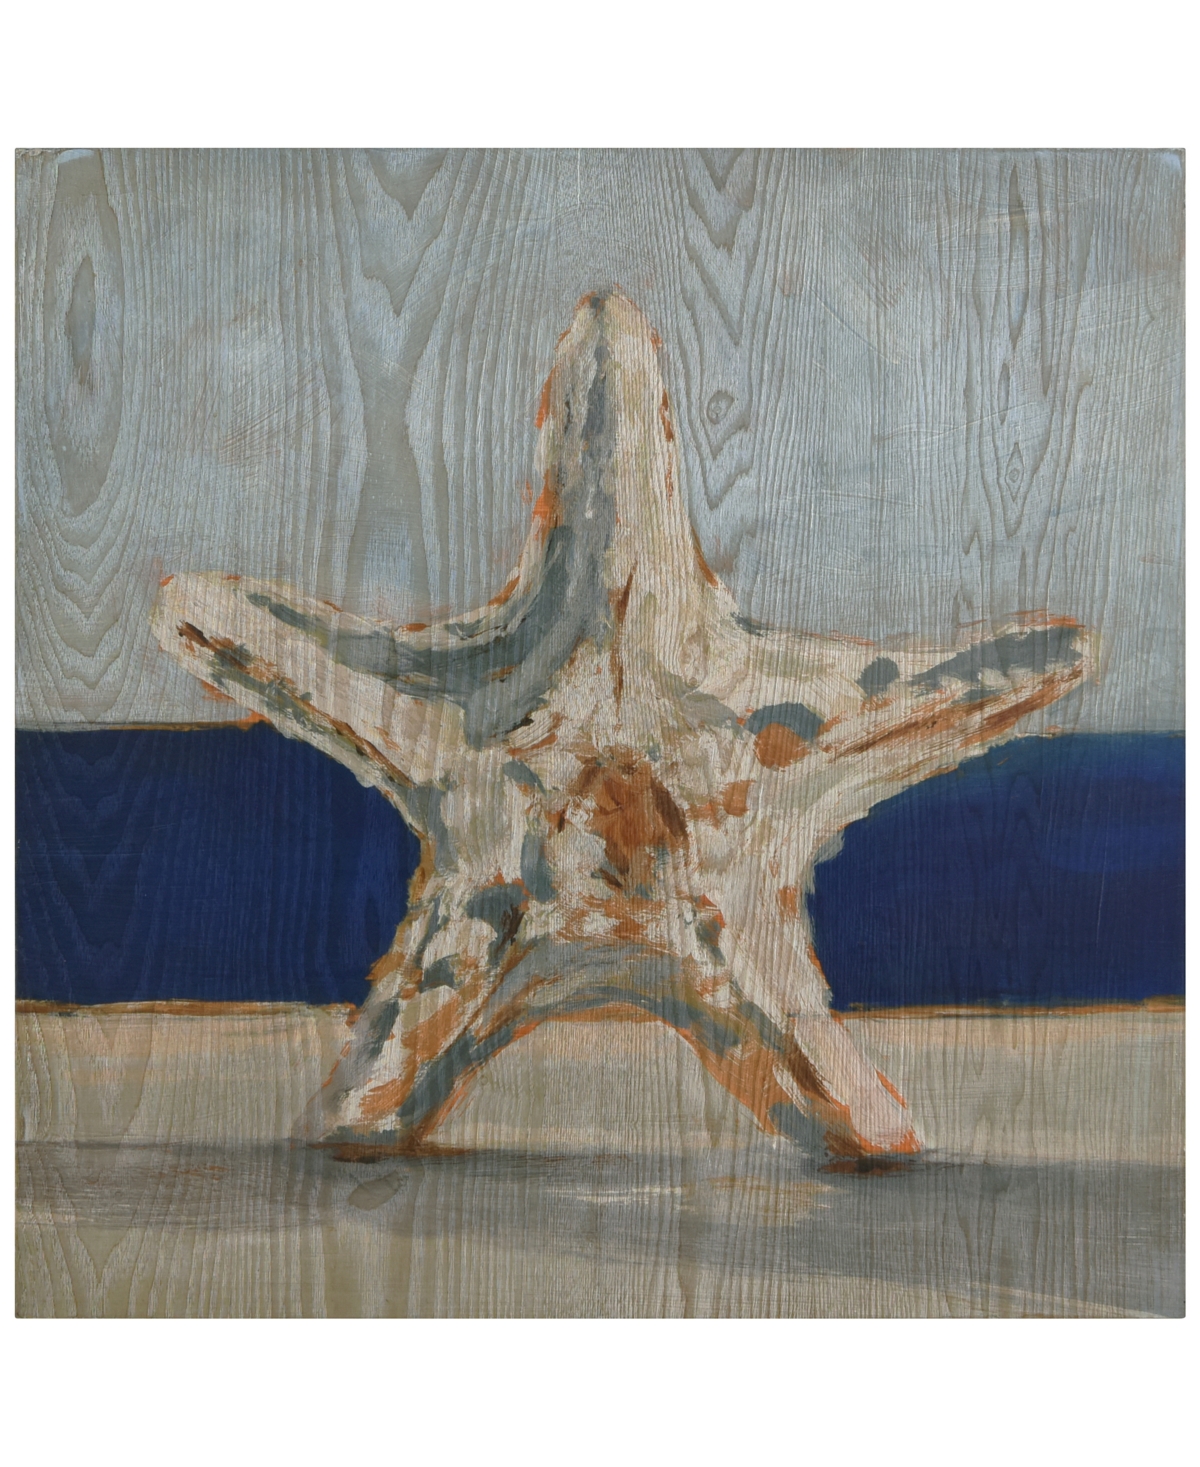 Empire Art Direct "starfish By The Sea" Fine Giclee Printed Directly On Hand Finished Ash Wood Wall Art, 24" X 24" X 1 In White,blue